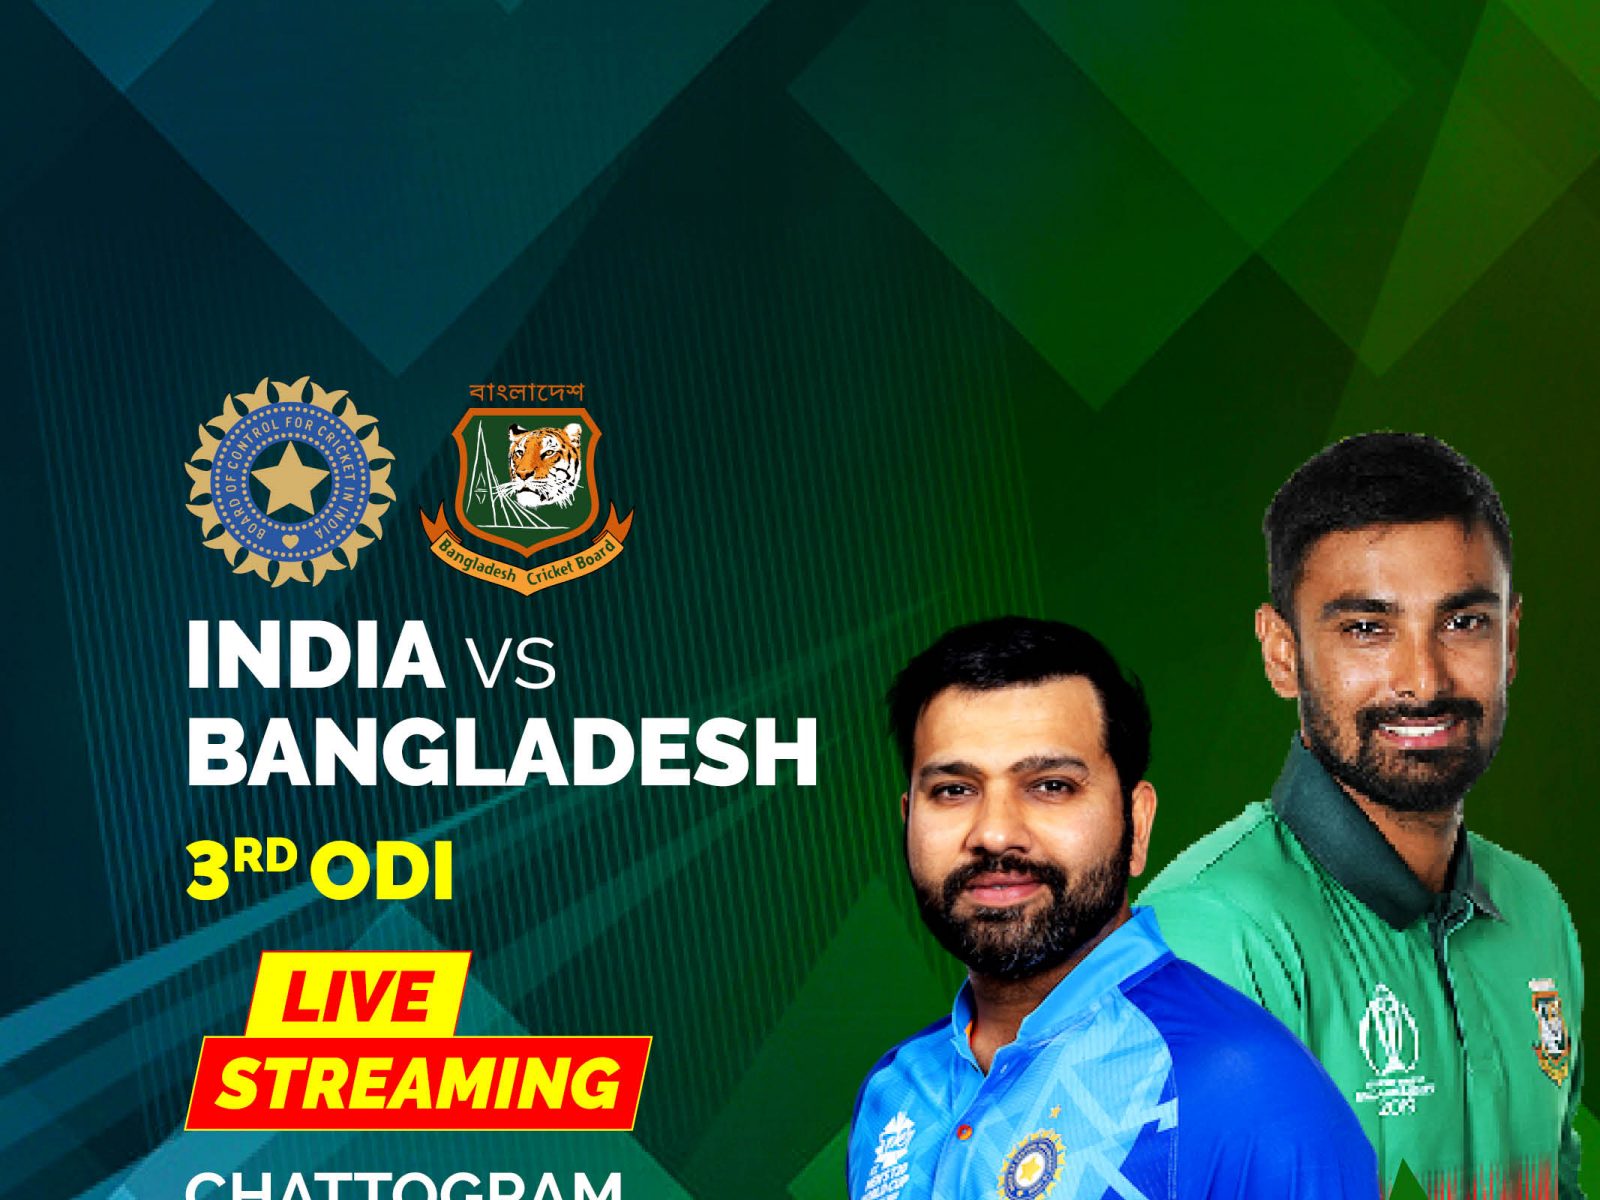 India vs Bangladesh 3rd ODI Live Streaming When and Where to Watch Live Coverage on Live TV and Online